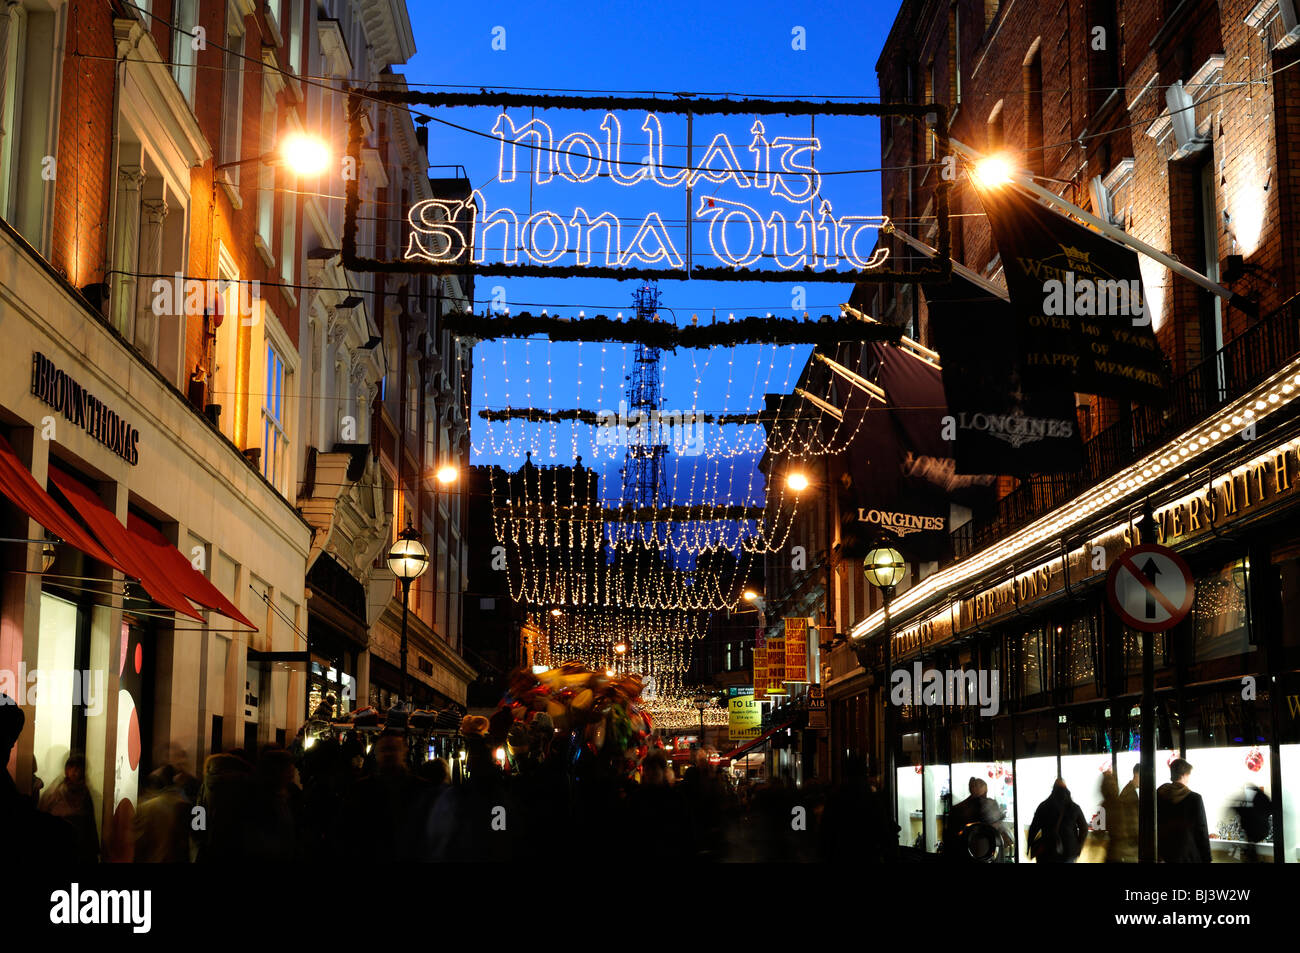 Buon Natale In Gaelico.Nollaig Shona High Resolution Stock Photography And Images Alamy